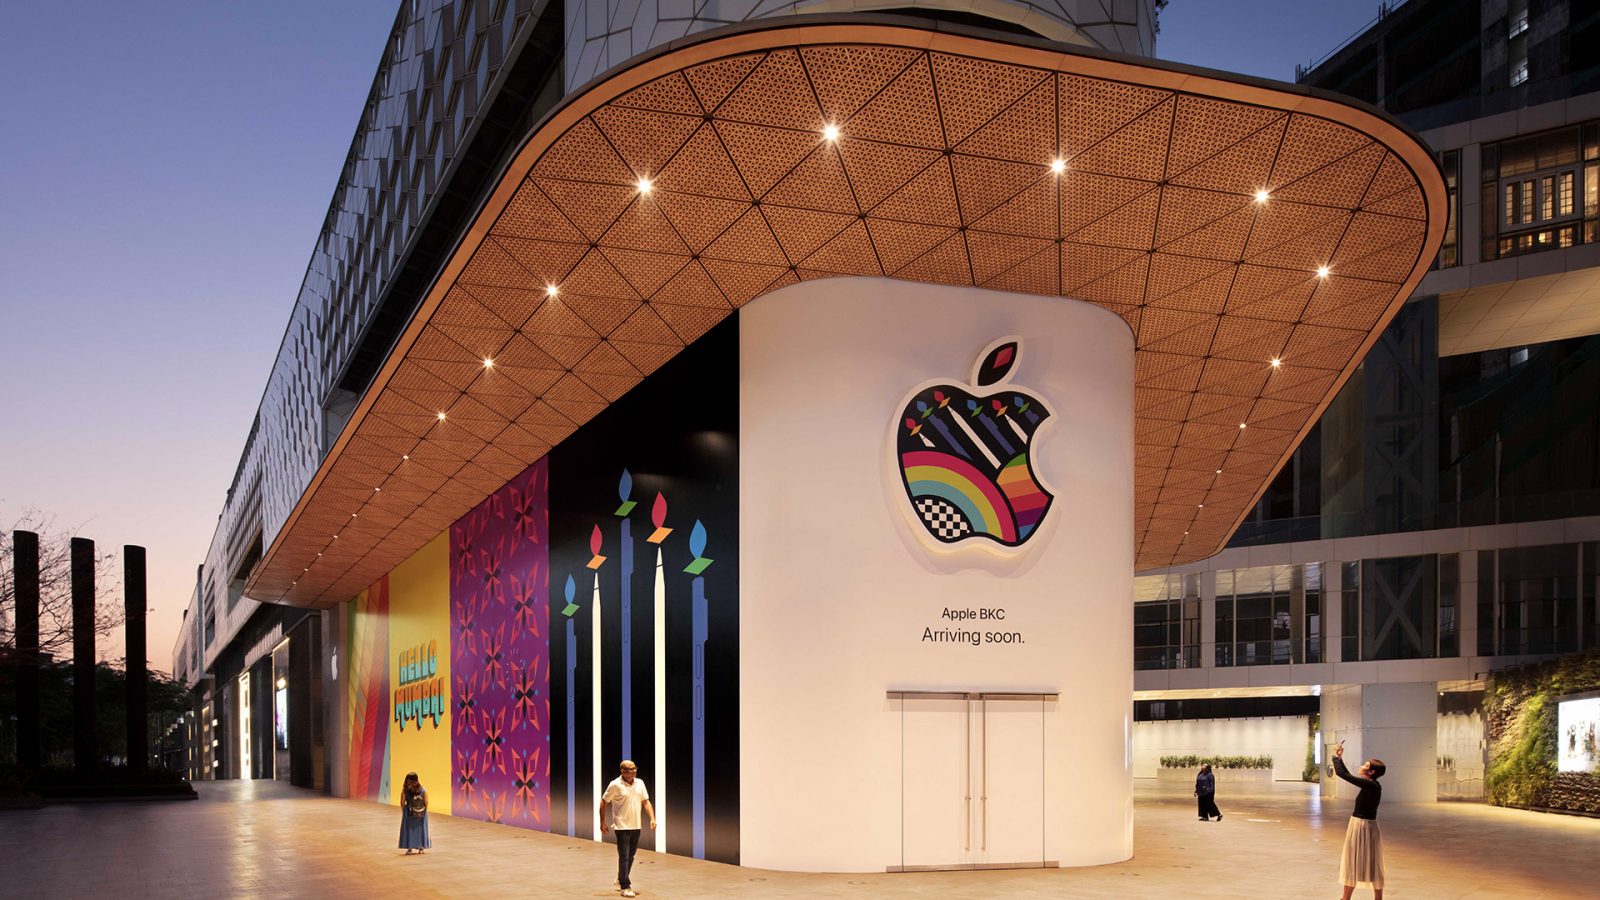 Apple unveils the barricade of its first retail store in India ahead of opening this month